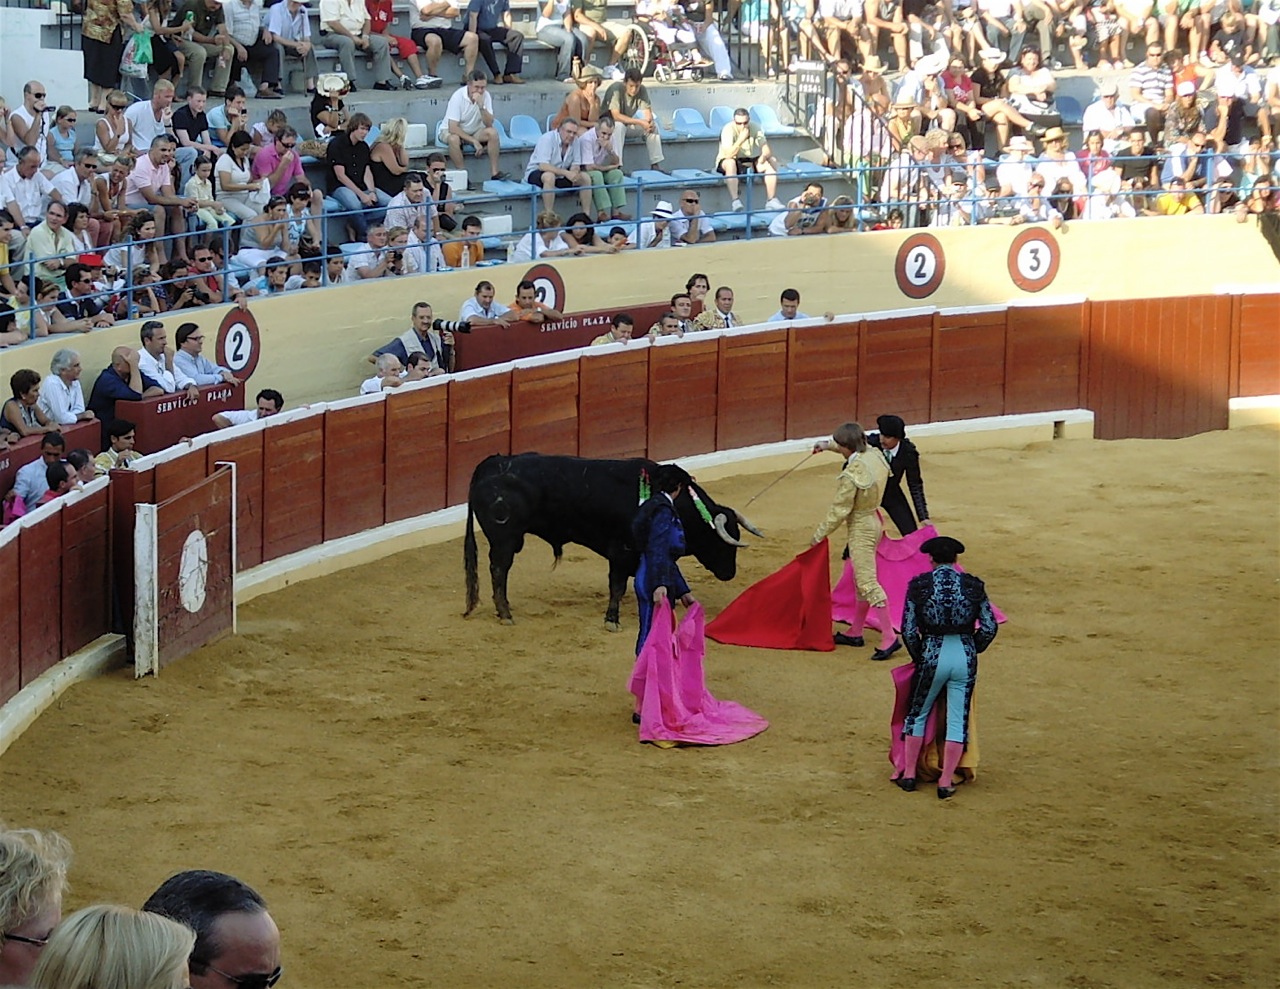 a bull that is on top of a dirt court